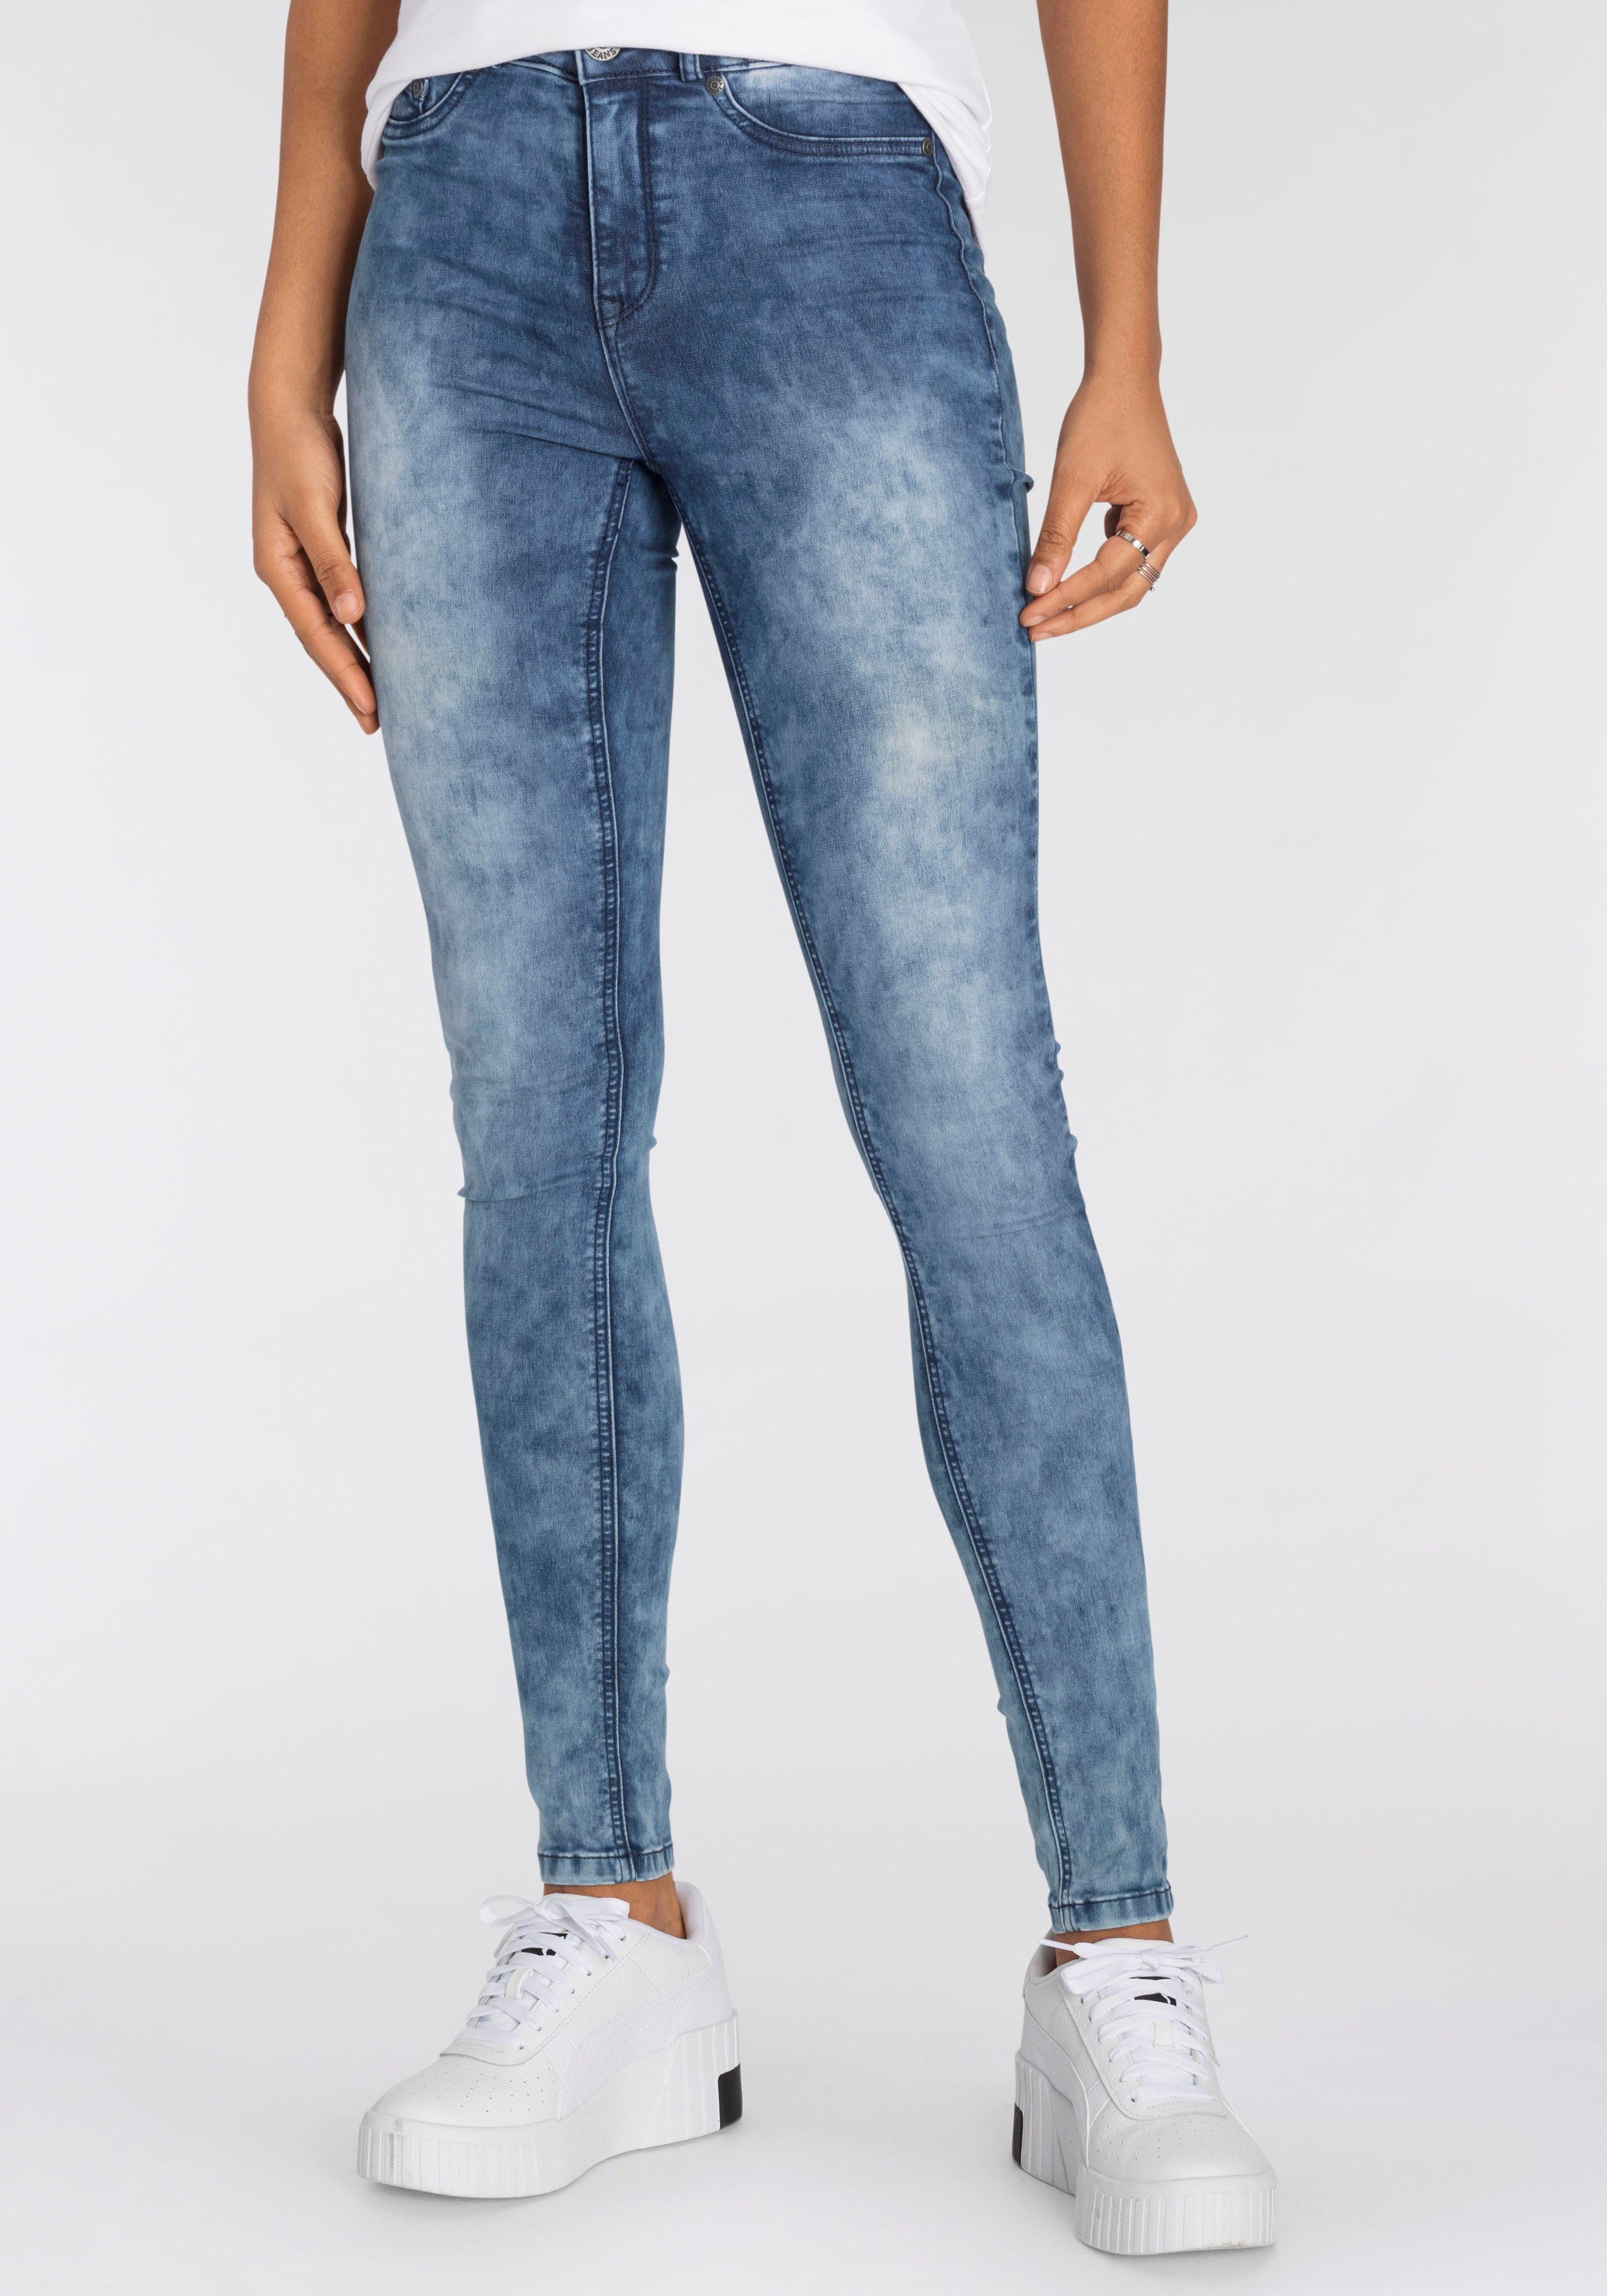 Arizona Skinny-fit-Jeans »Ultra Stretch moon washed« Moonwashed Jeans  online kaufen | OTTO